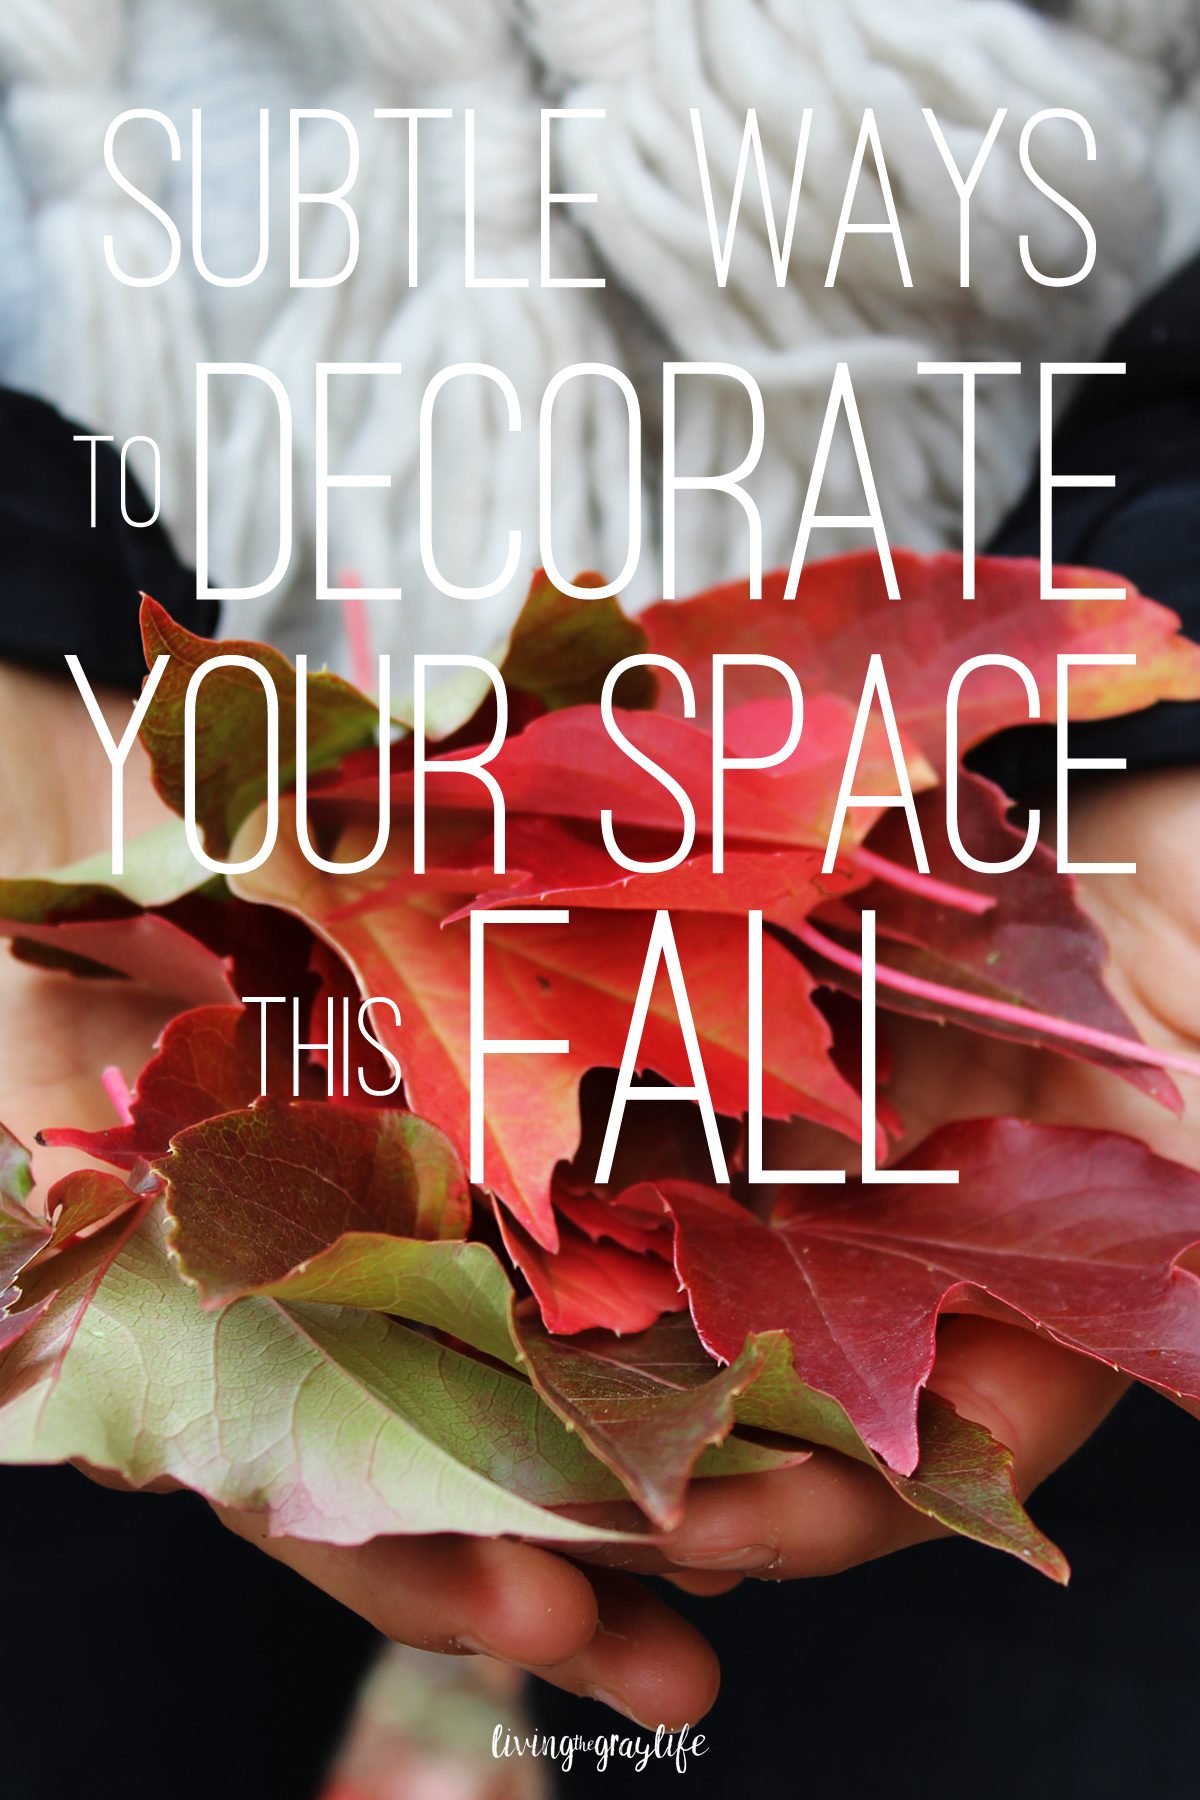 Subtle Ways to Decorate Your Space This Fall